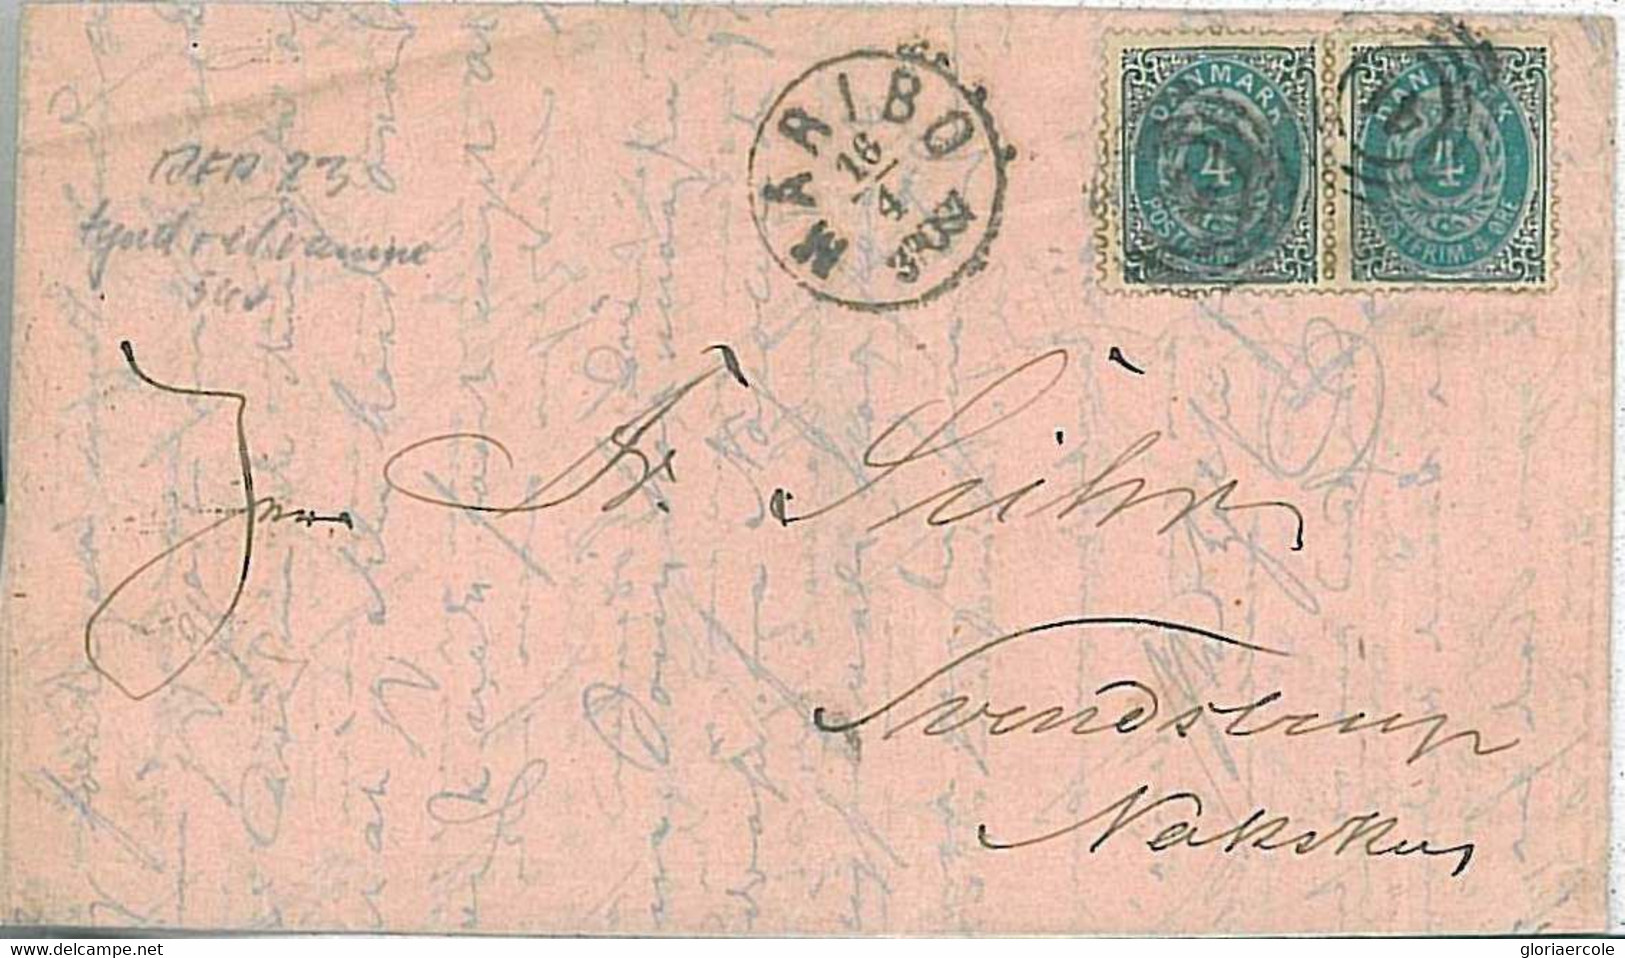 27229  - DENMARK  - Postal History - COVER From MARIBO 1883 - FULL CONTENTS - Briefe U. Dokumente